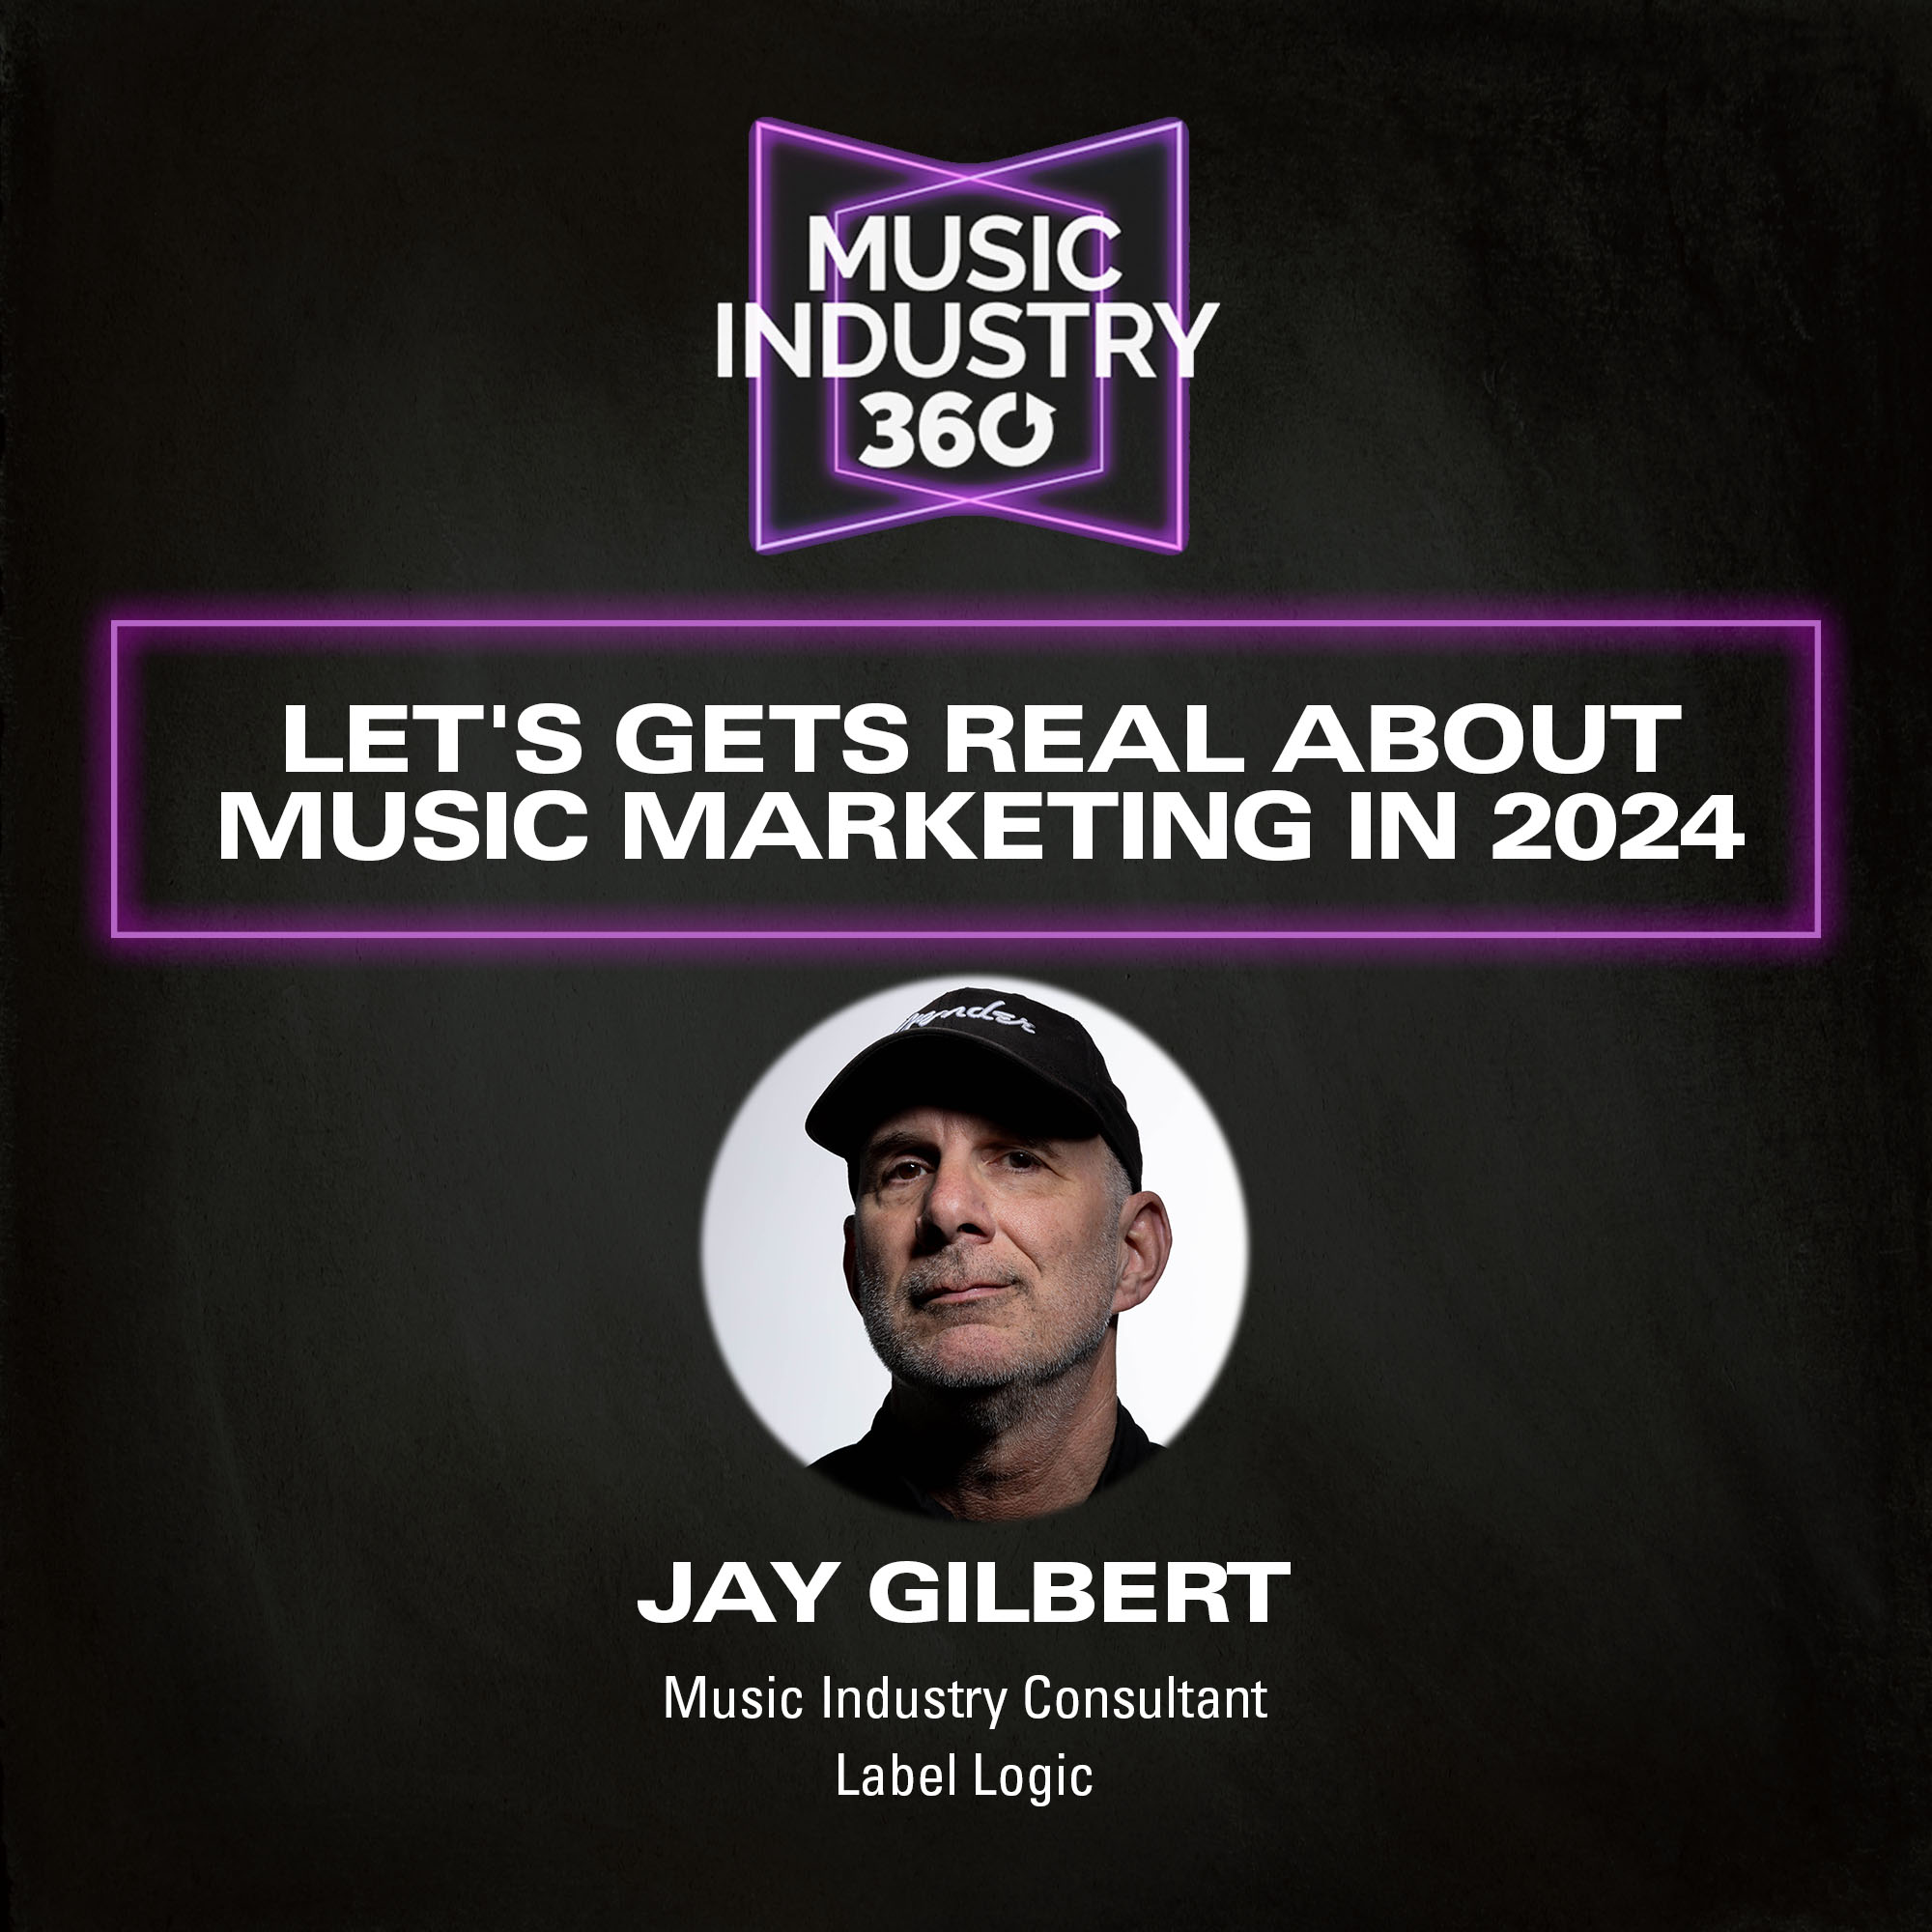 Let's Get Real About Music Marketing in 2024 with Jay Gilbert